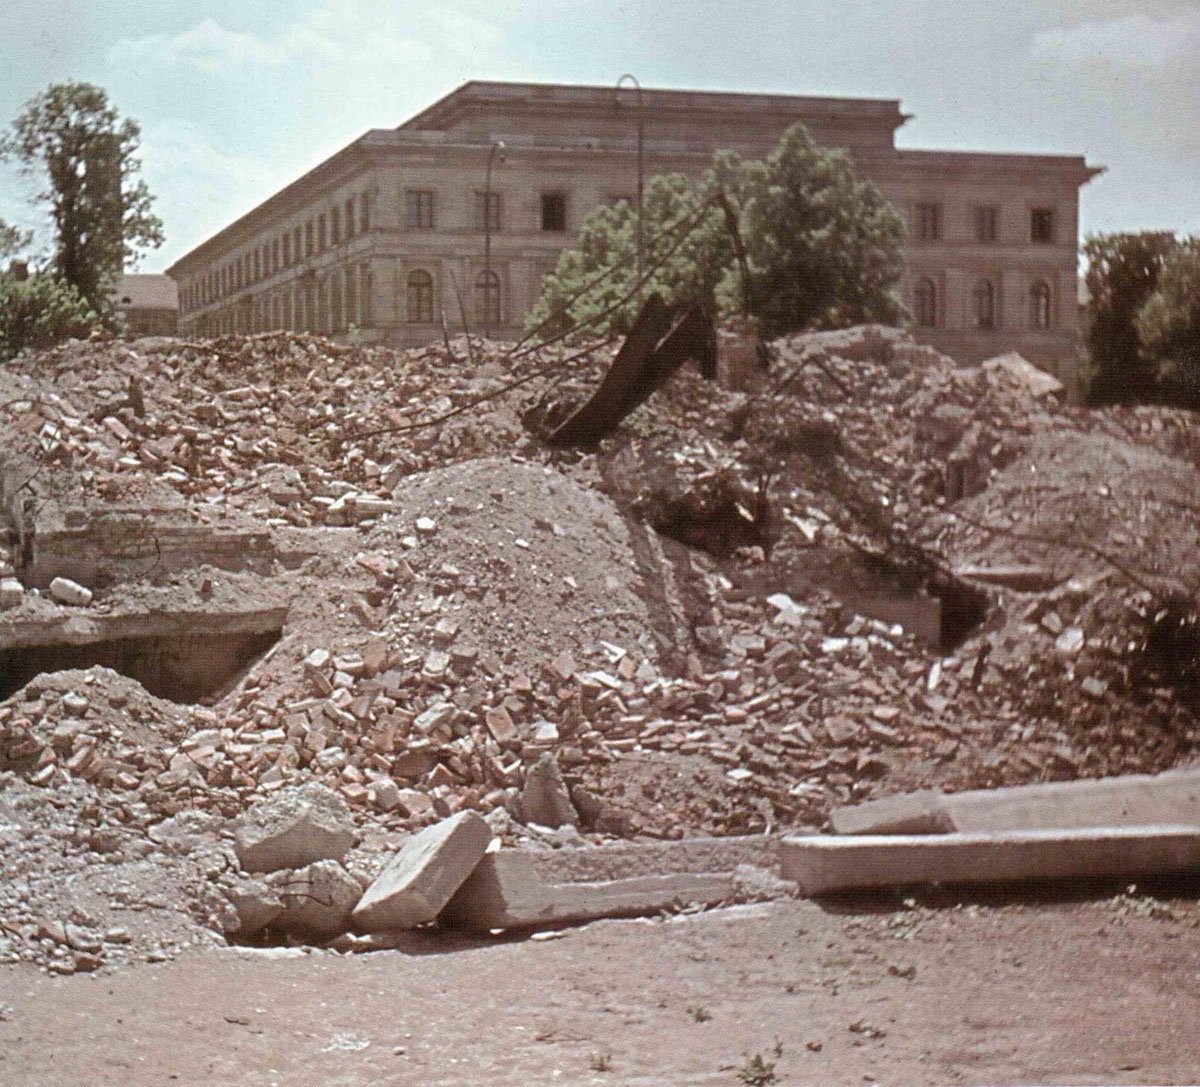 headquarters of the Nazi-Party in Munich heap of rubble